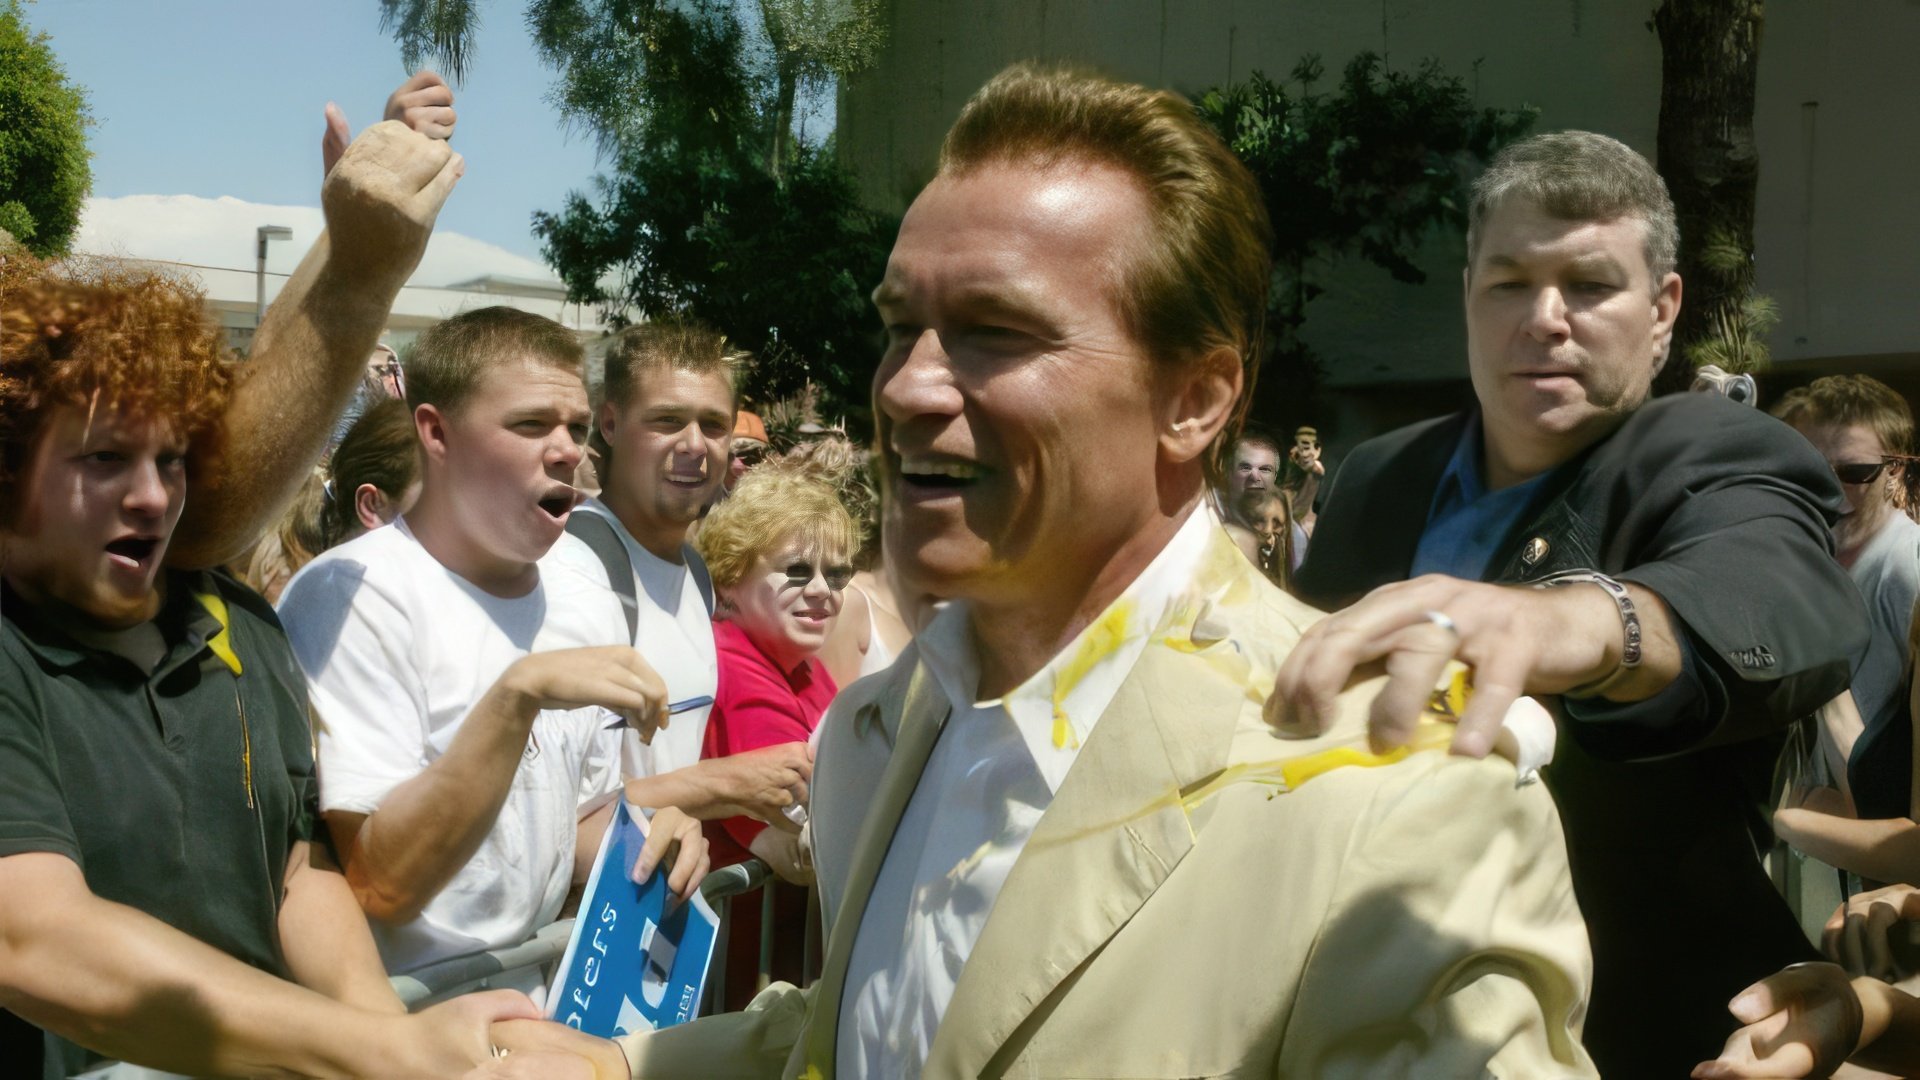 Schwarzenegger was pelted with eggs during the election campaign